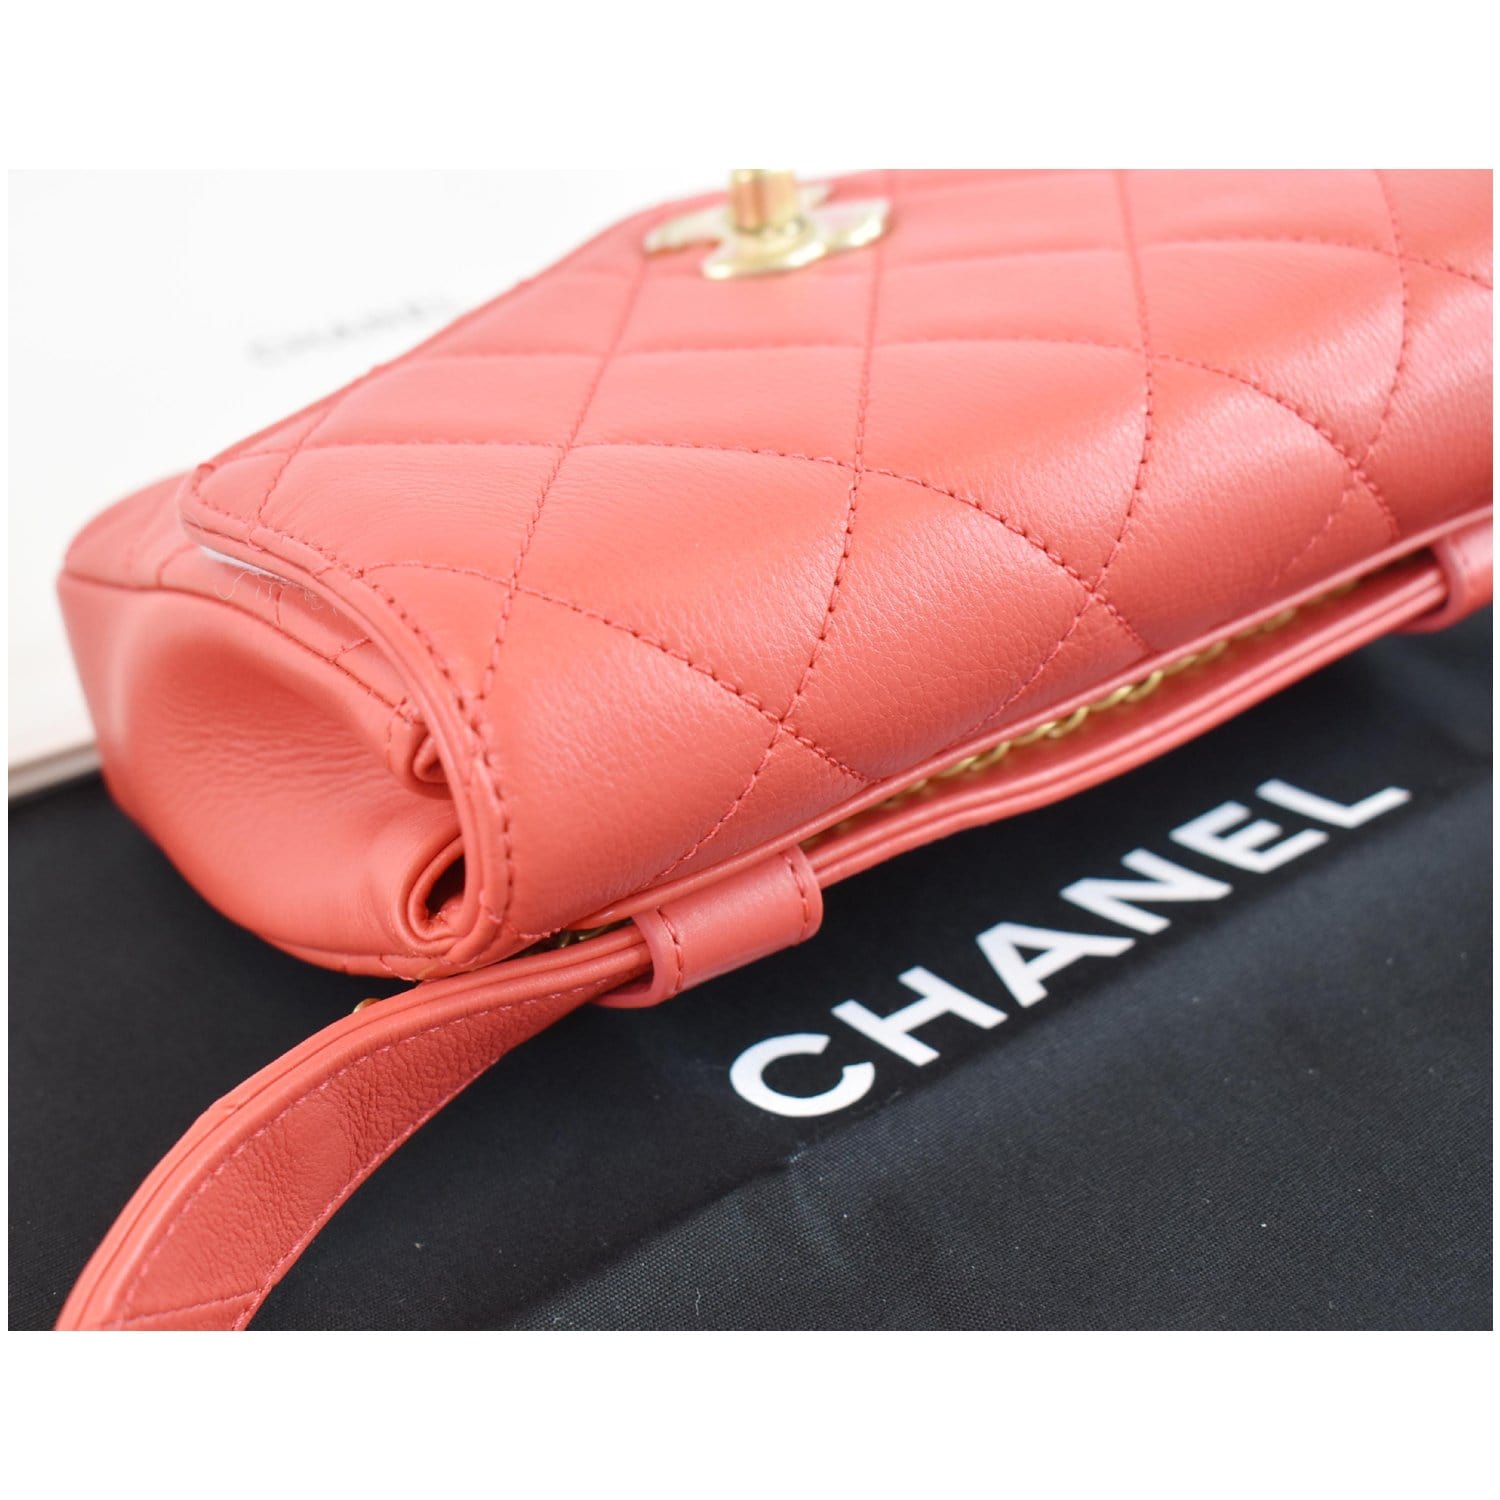 Chanel Red Leather CC Mania Double Zip Waist Belt Bag Chanel